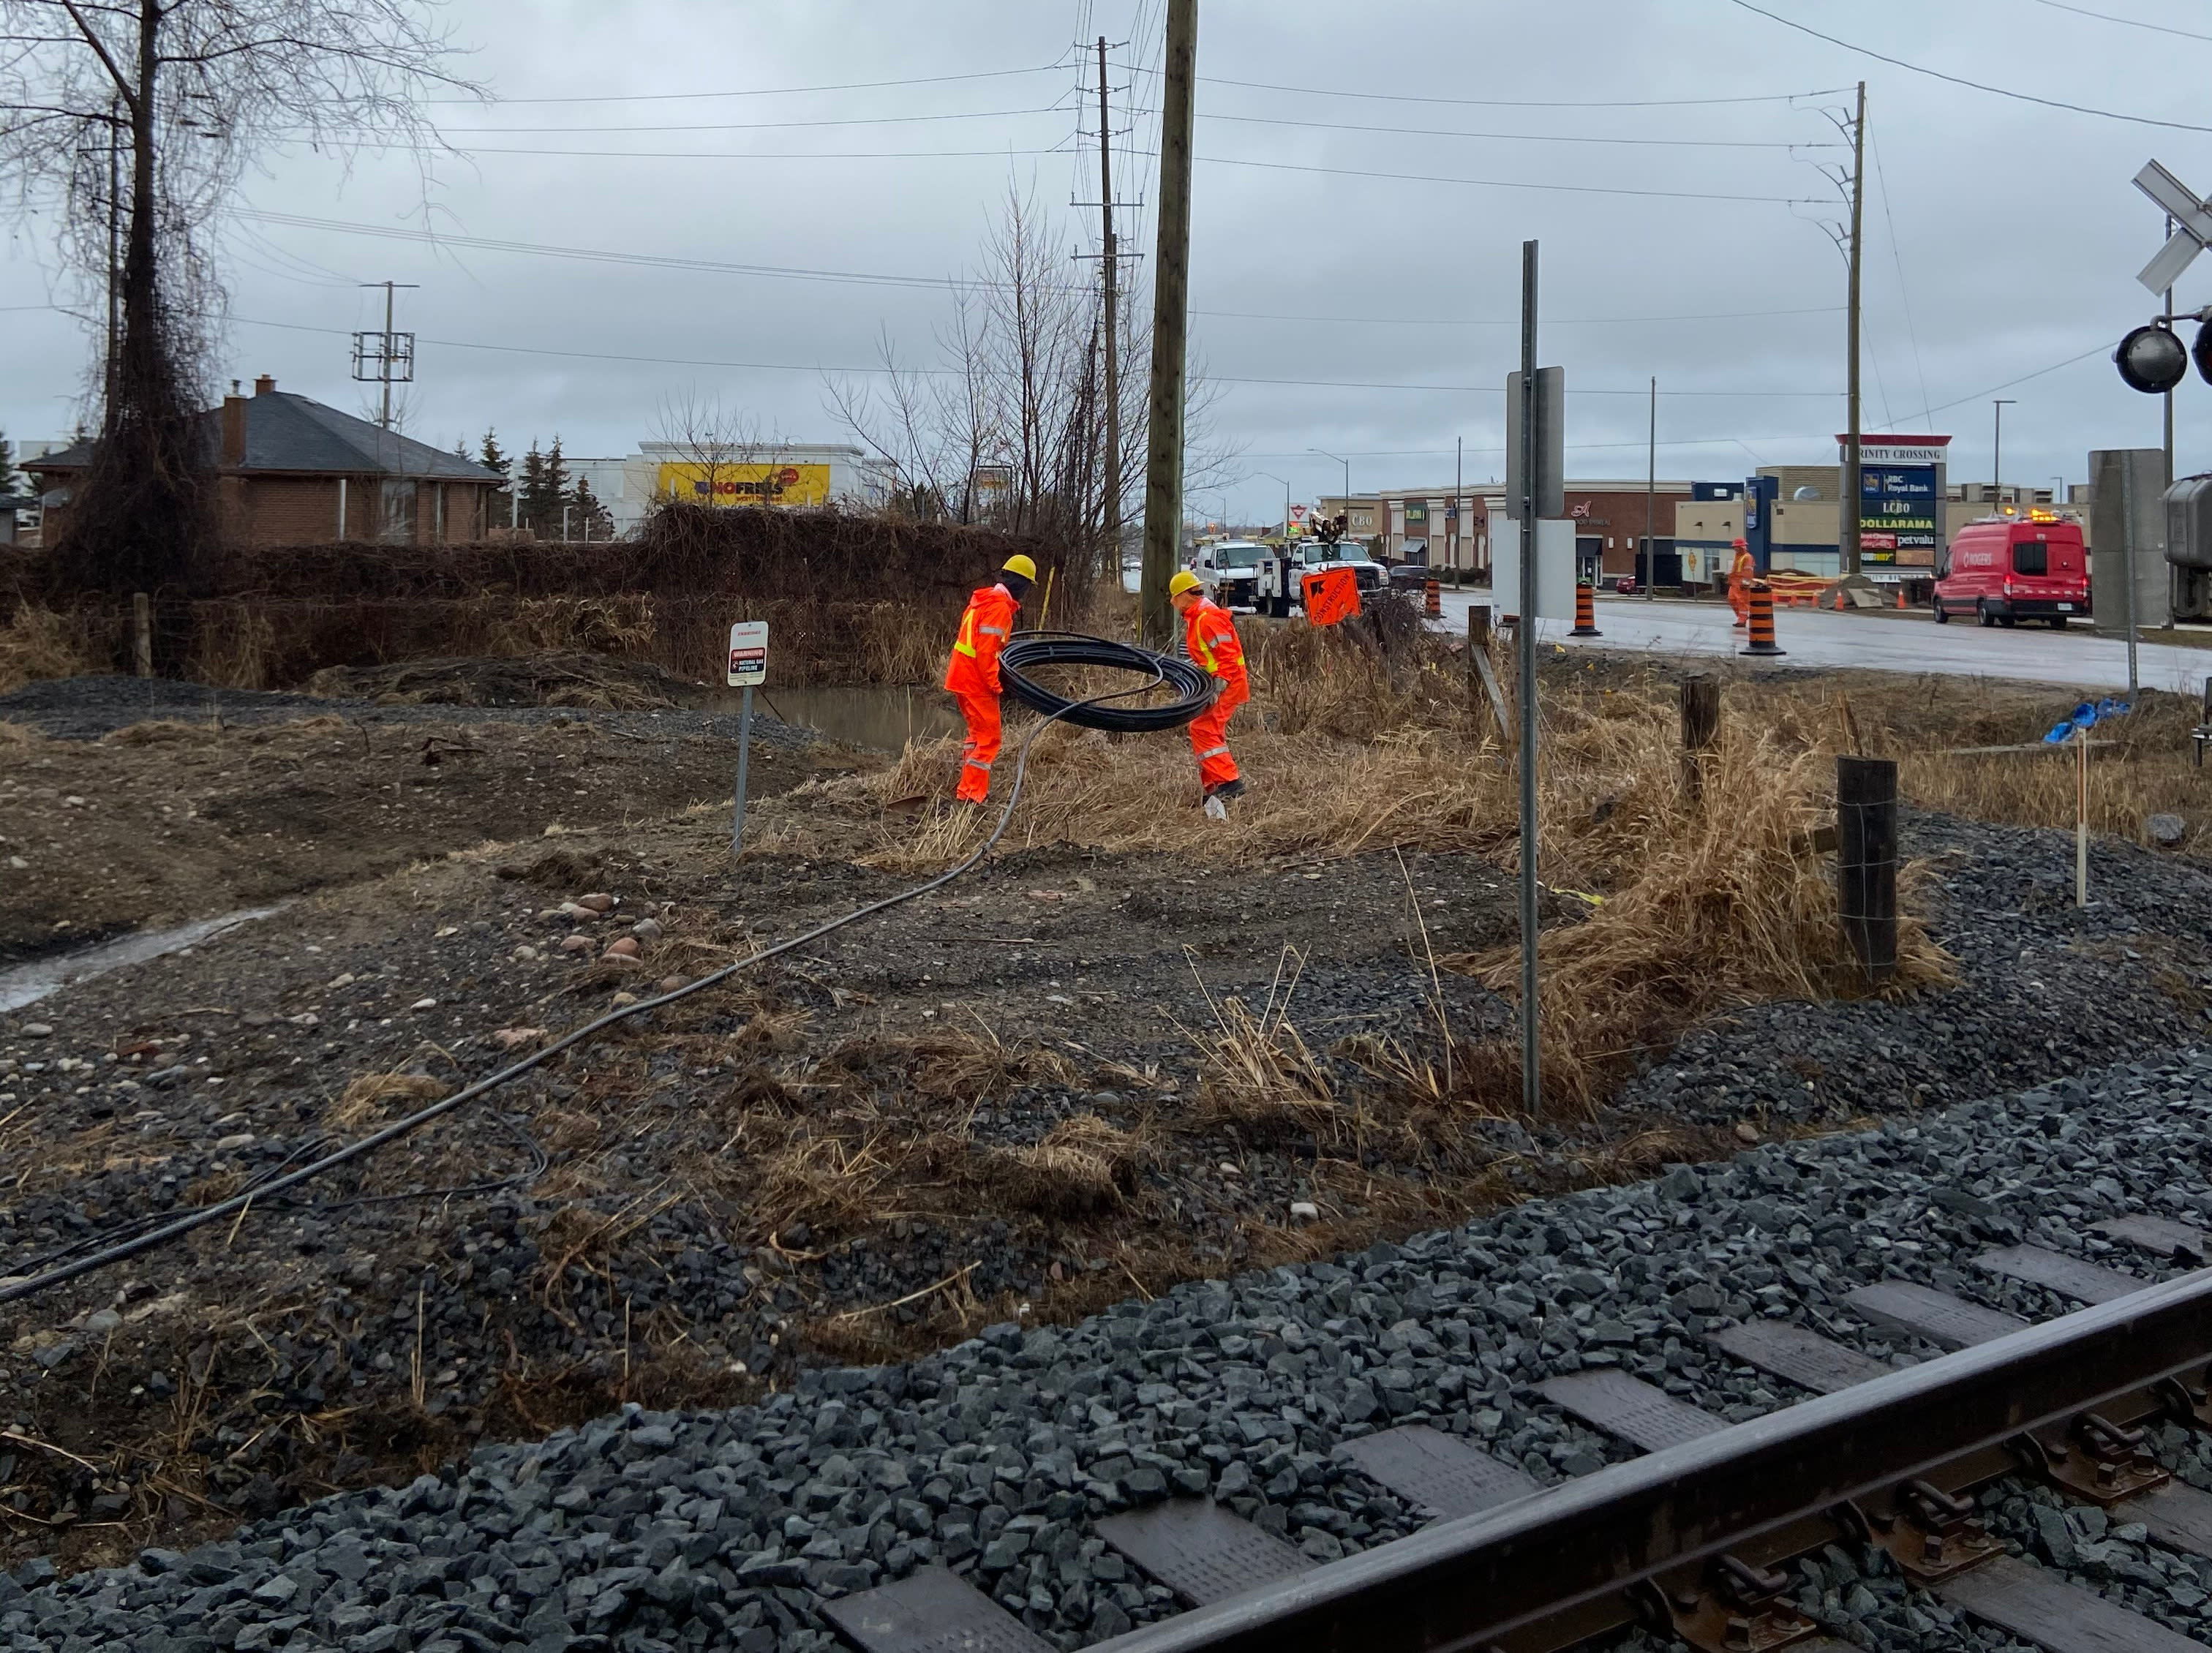 Construction workers run cable near a railway crossing